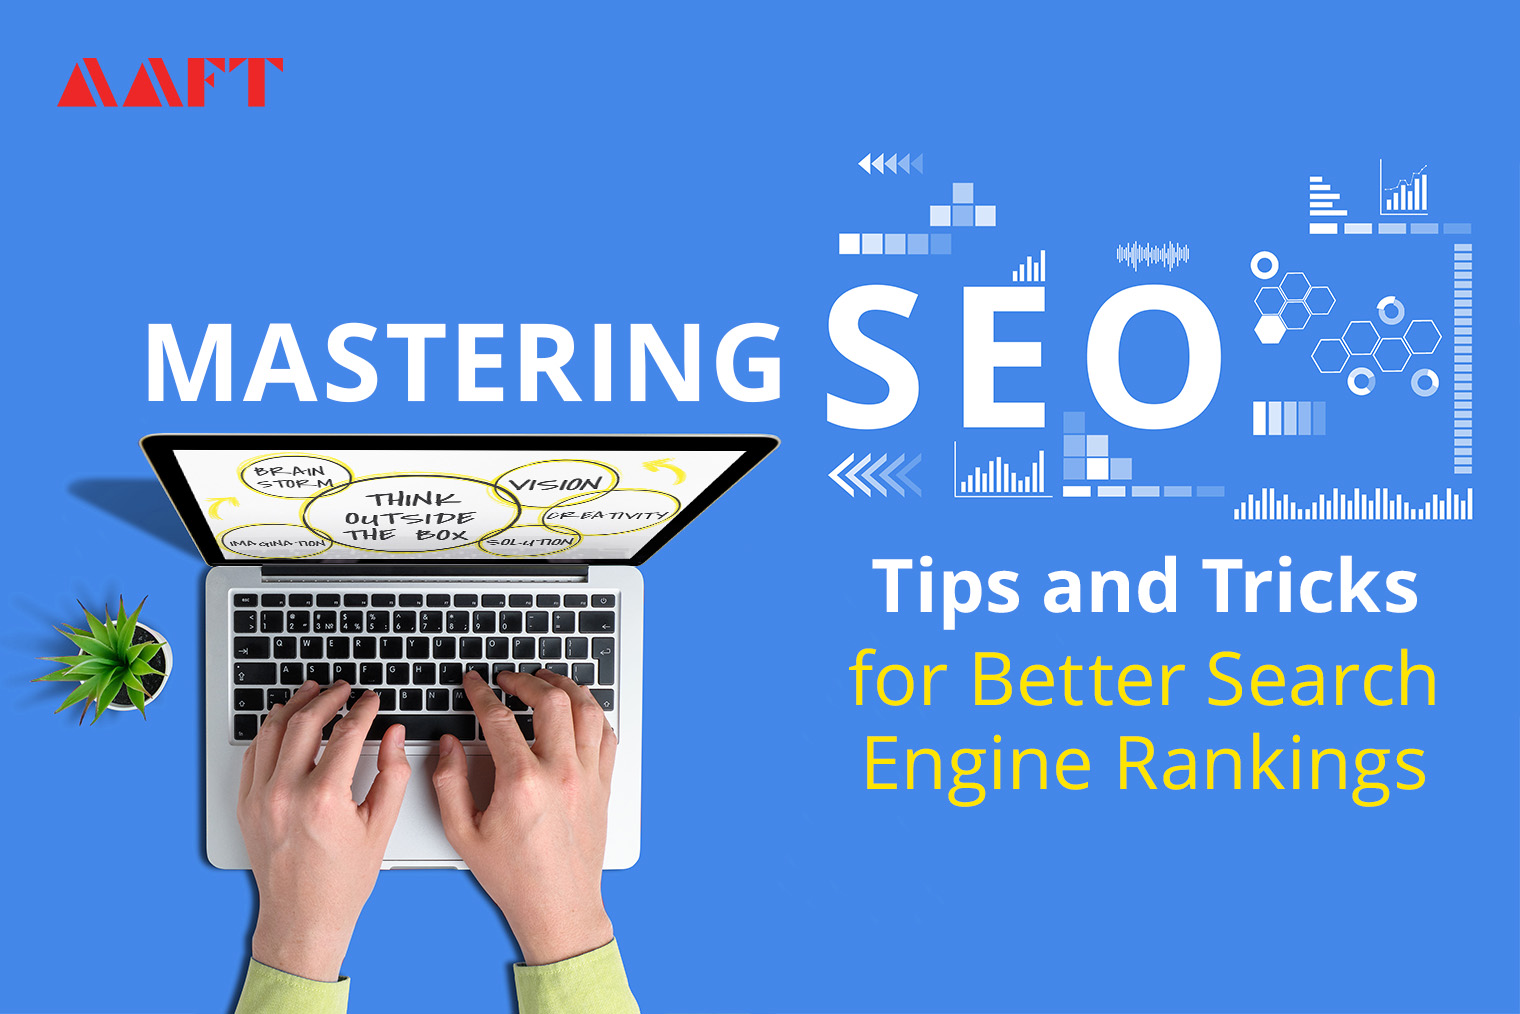 Mastering SEO: Tips and Tricks